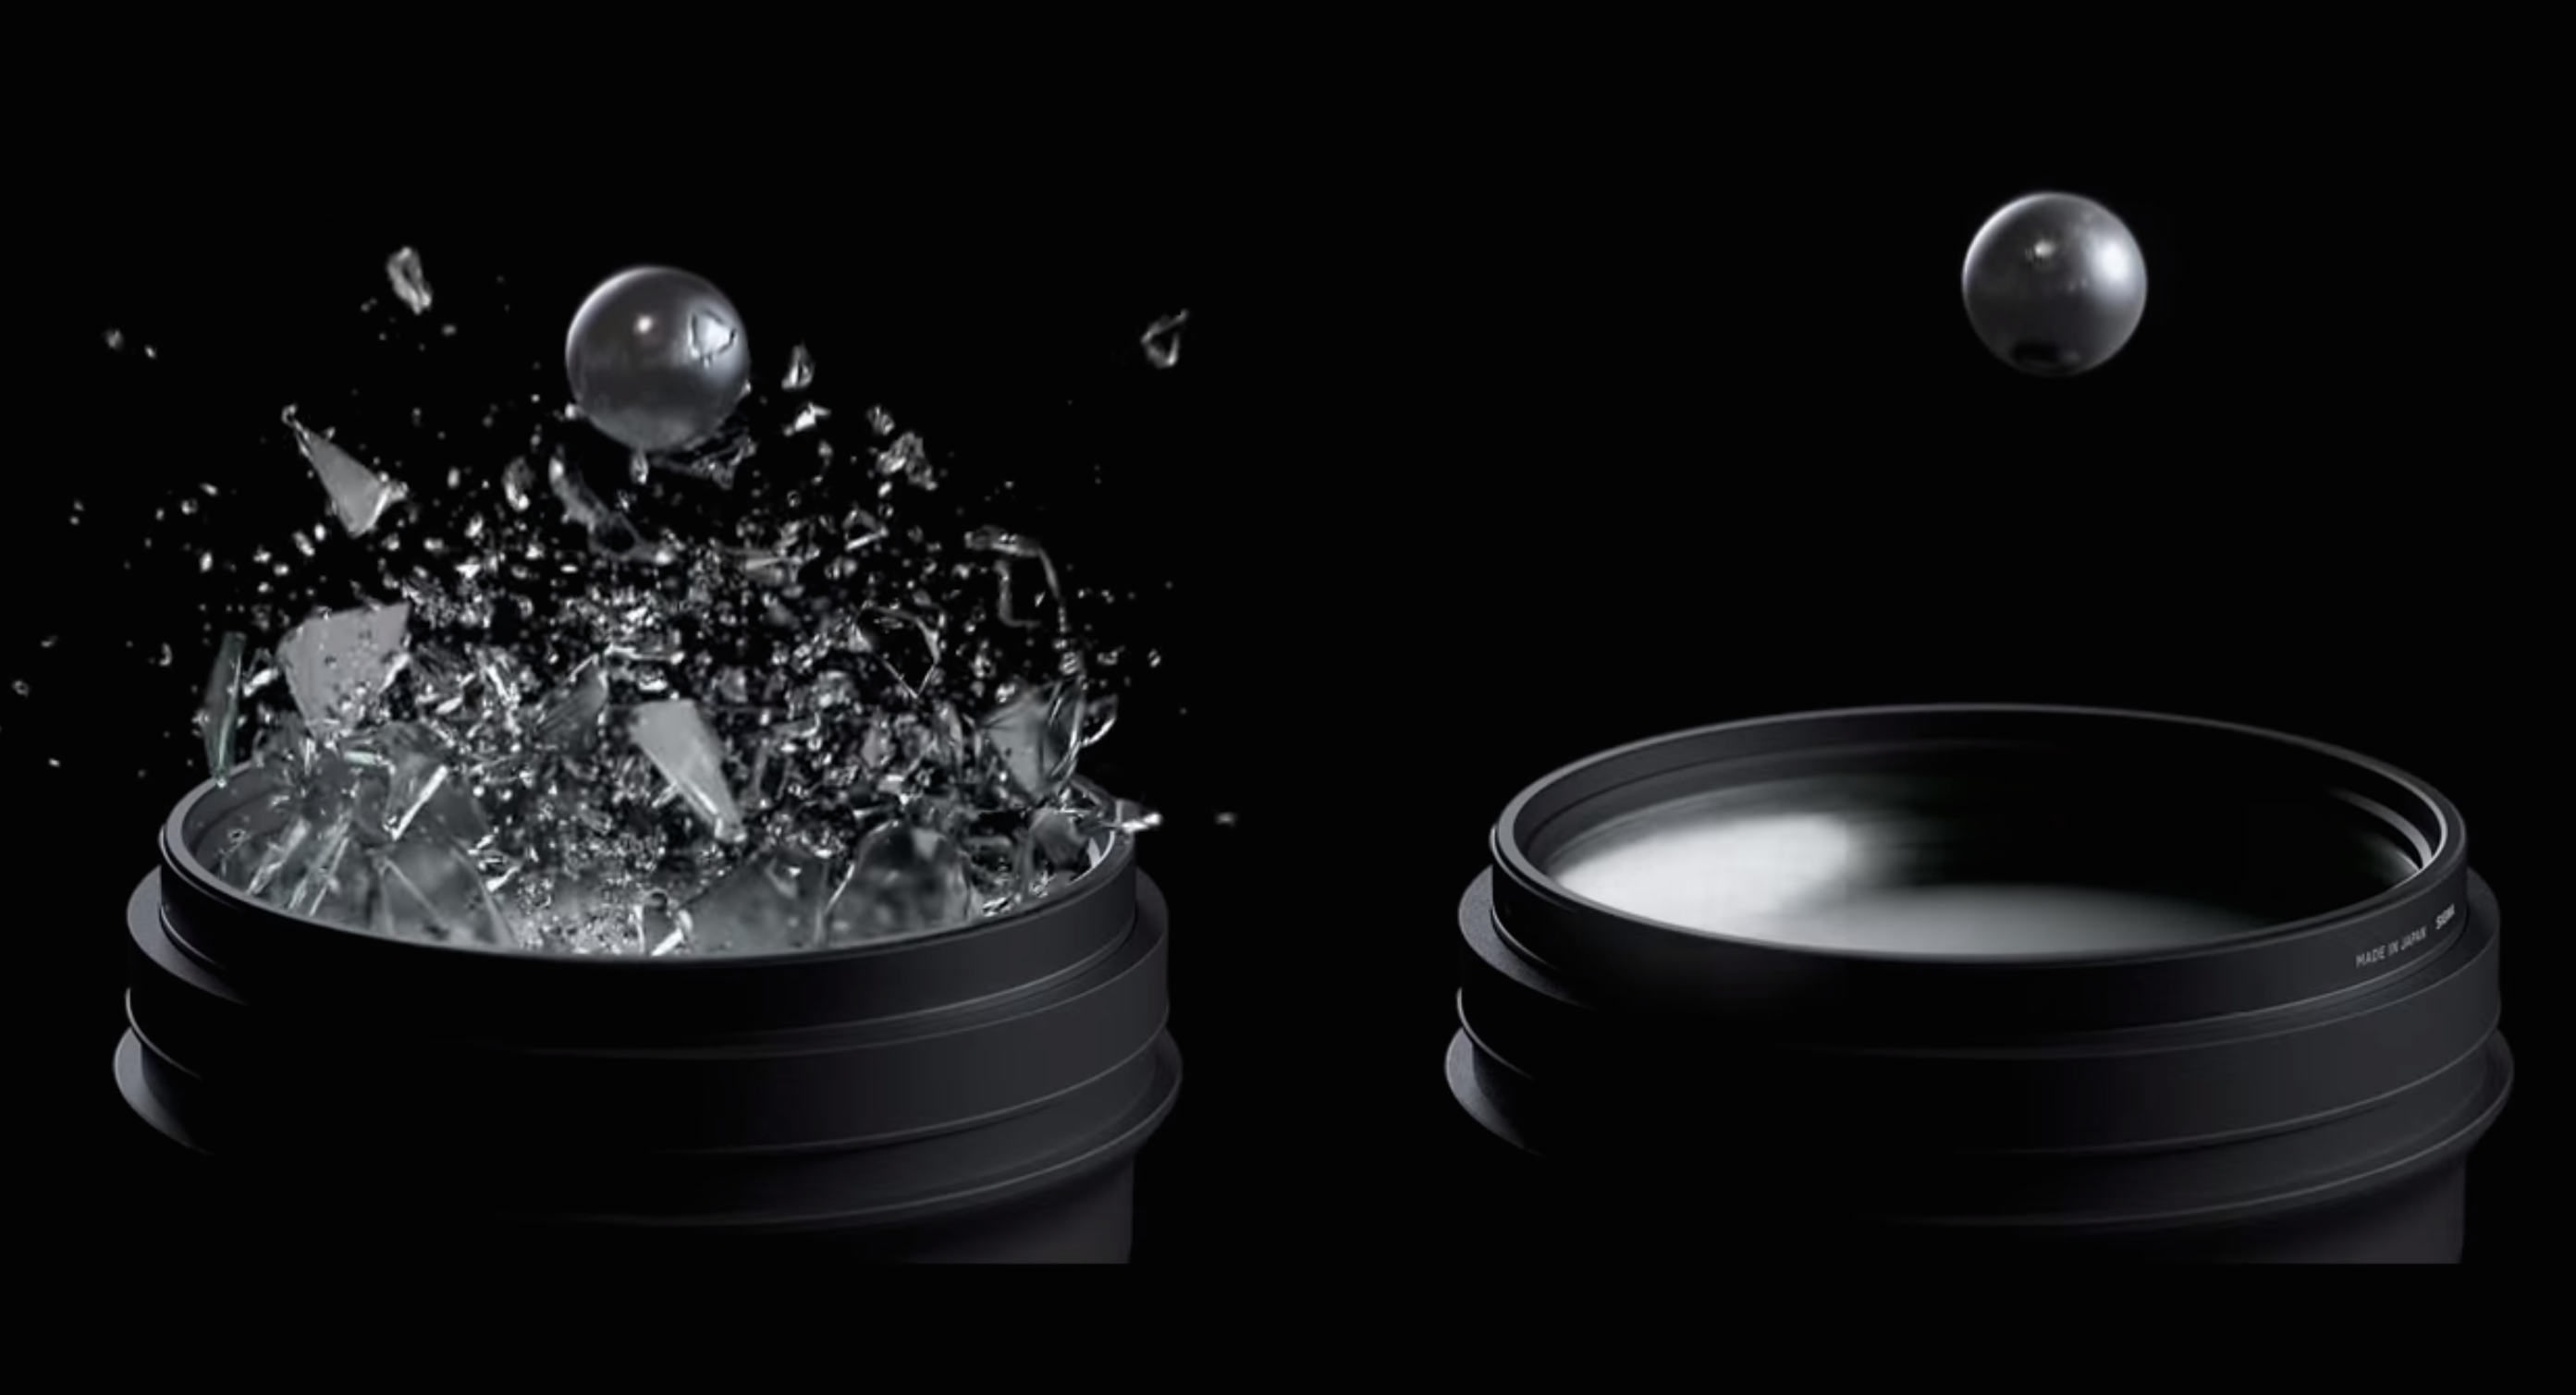 Sigma's New Ceramic Lens Filters are Super-Strong & Repel Water